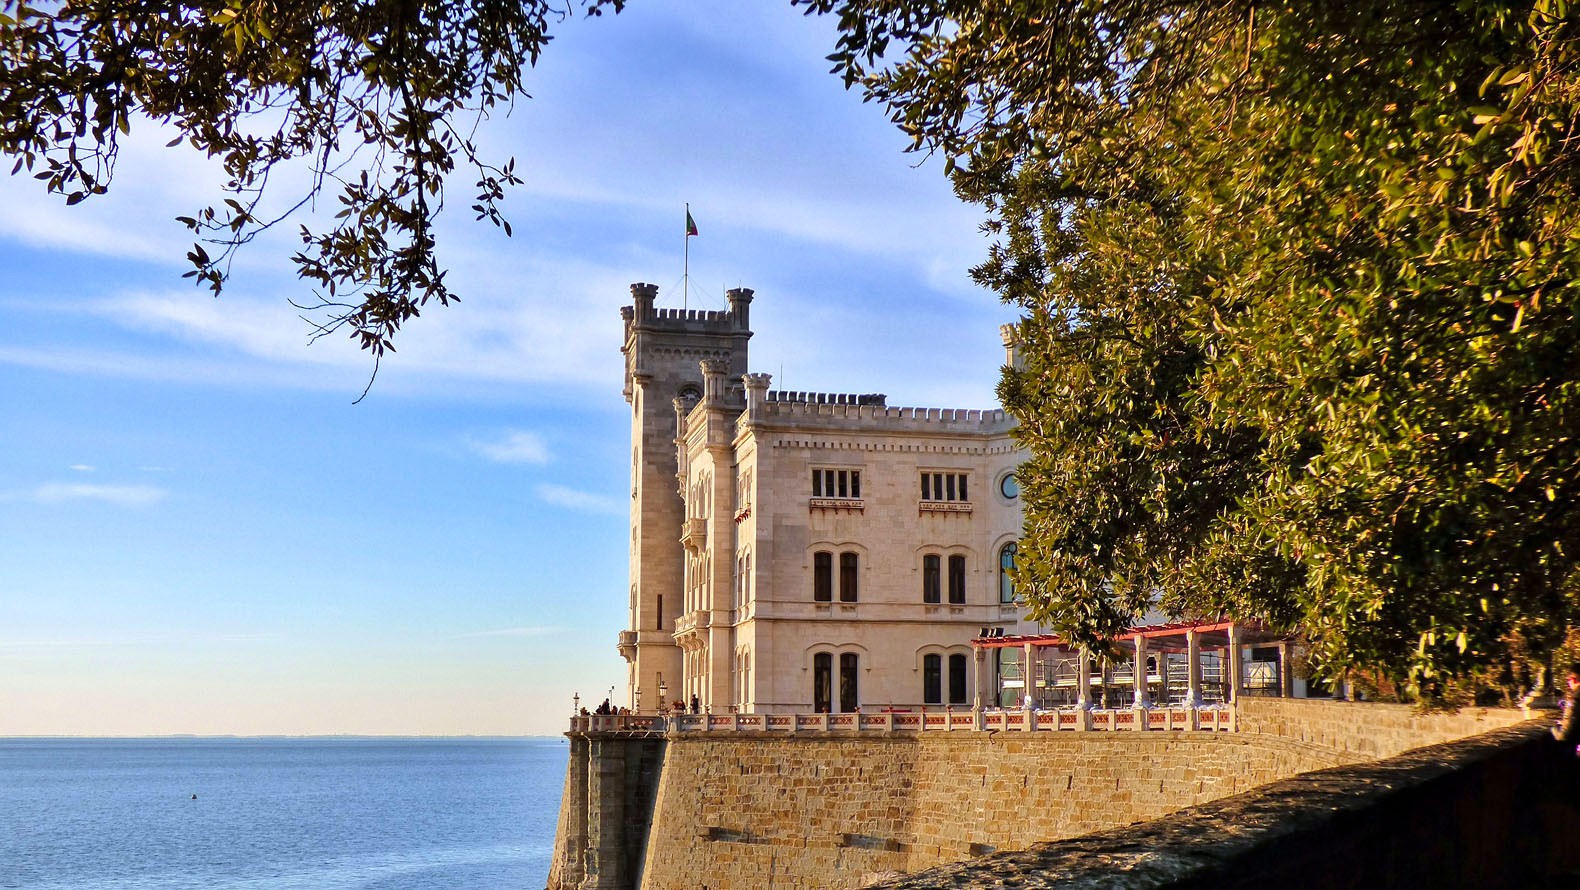 What to do in Trieste for a weekend? Image